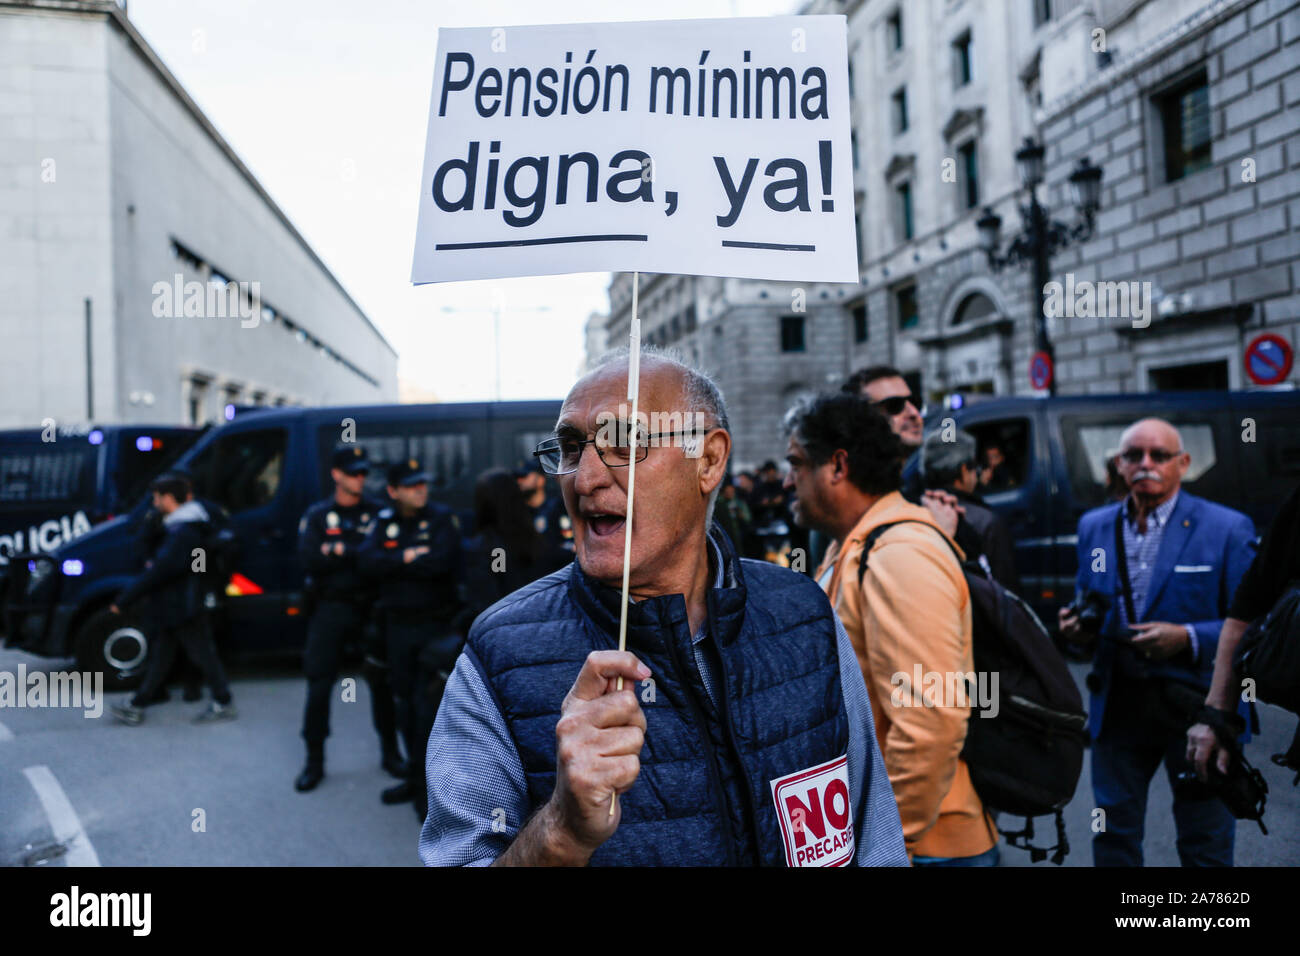 An old man holds a placard during the demonstration. Thousands of people gathered at Puerta del Sol to protest against precariousness and low pensions for elder people. Marches from Bilbao (northern Spain) and Rota (southern Spain) met at the country's capital to protest in front of Spanish Parliament. Stock Photo